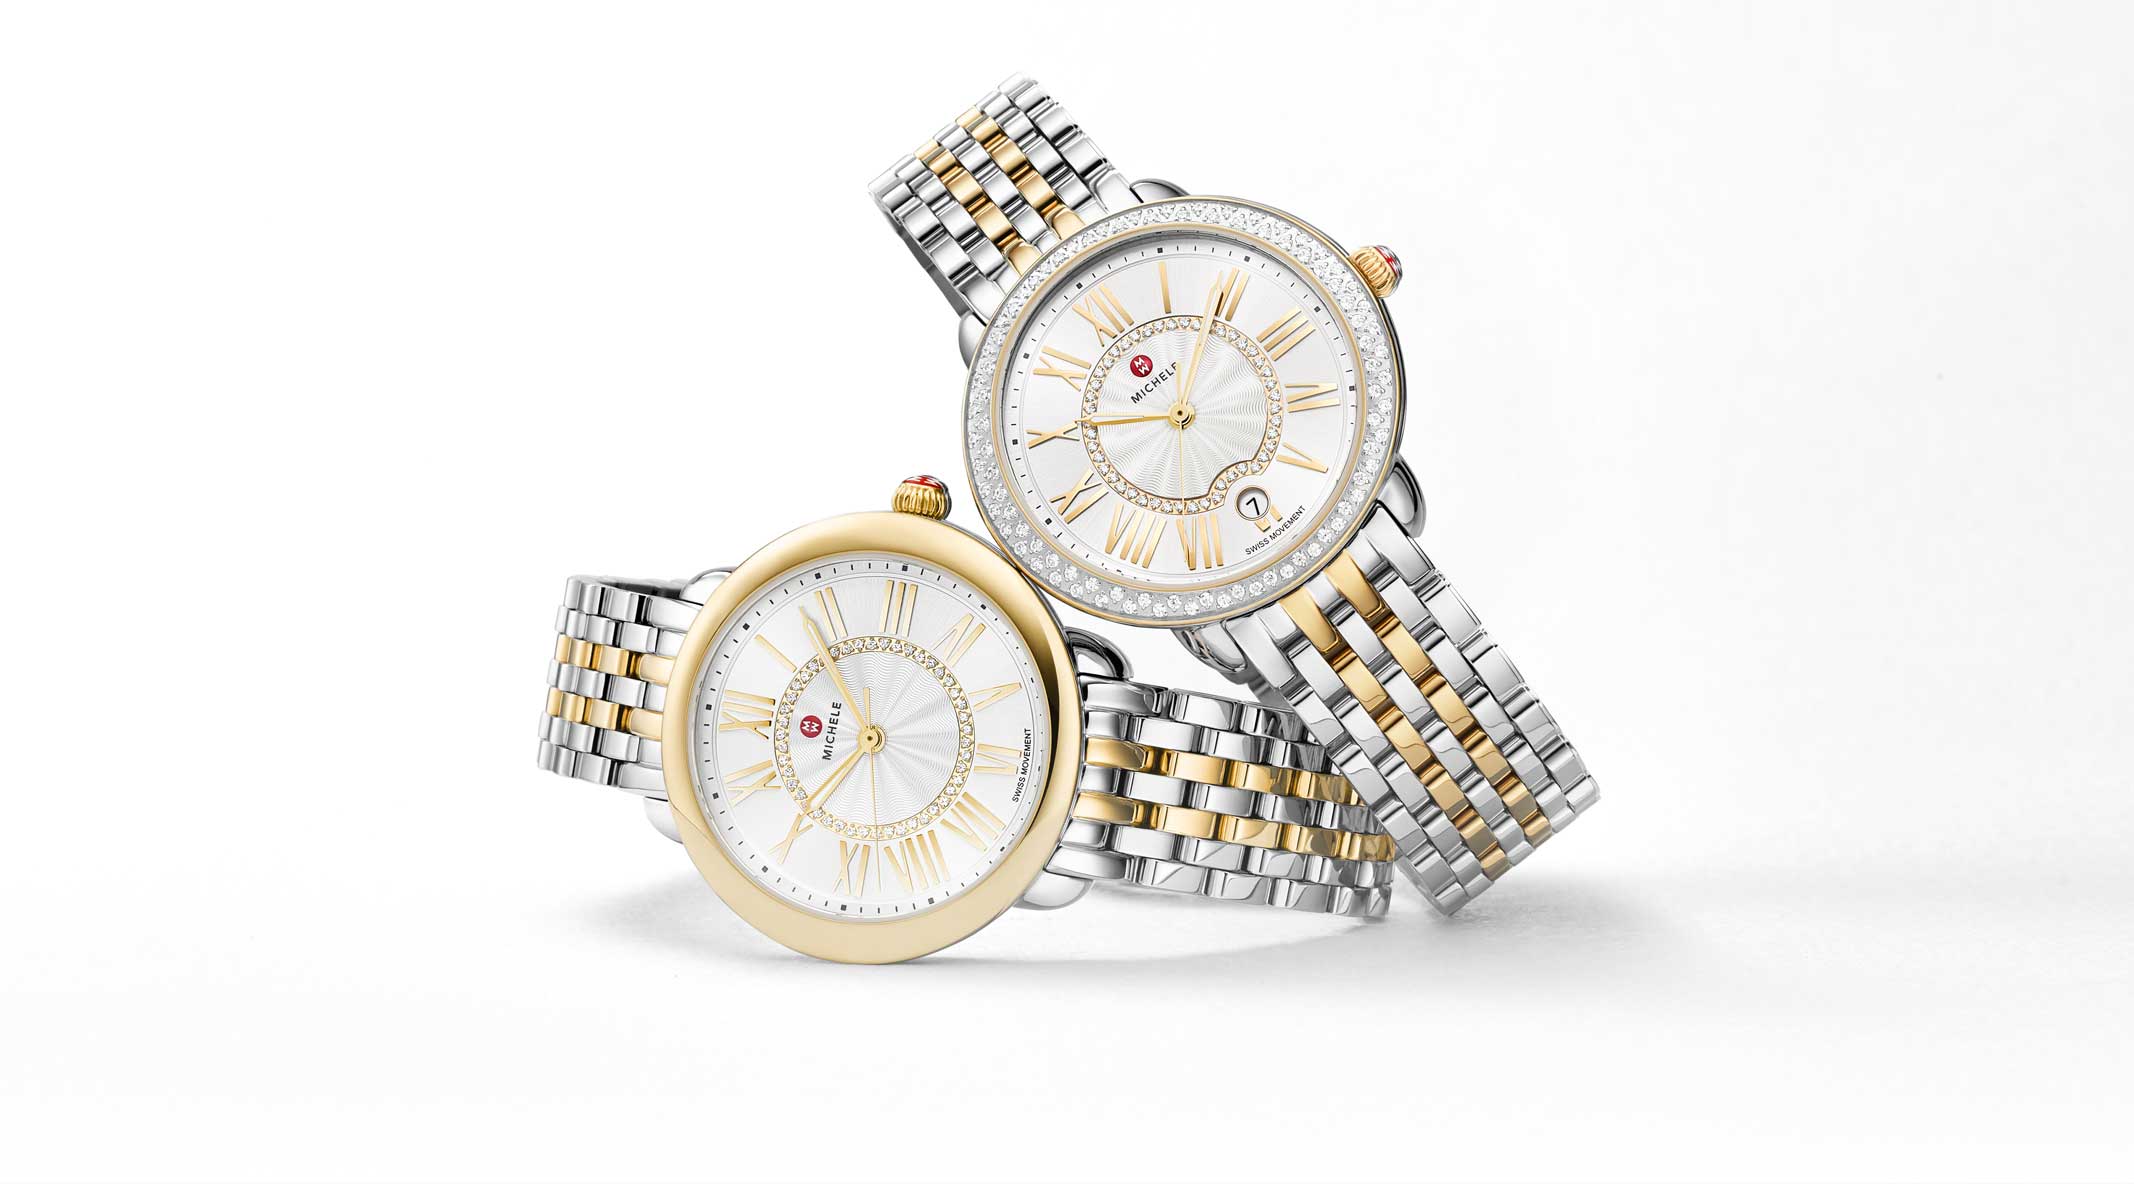 Two serein watches featuring signature round silhouette, Roman numeral indexes, one with a diamond-covered bezel. Both in two-tone stainless and 18K gold.